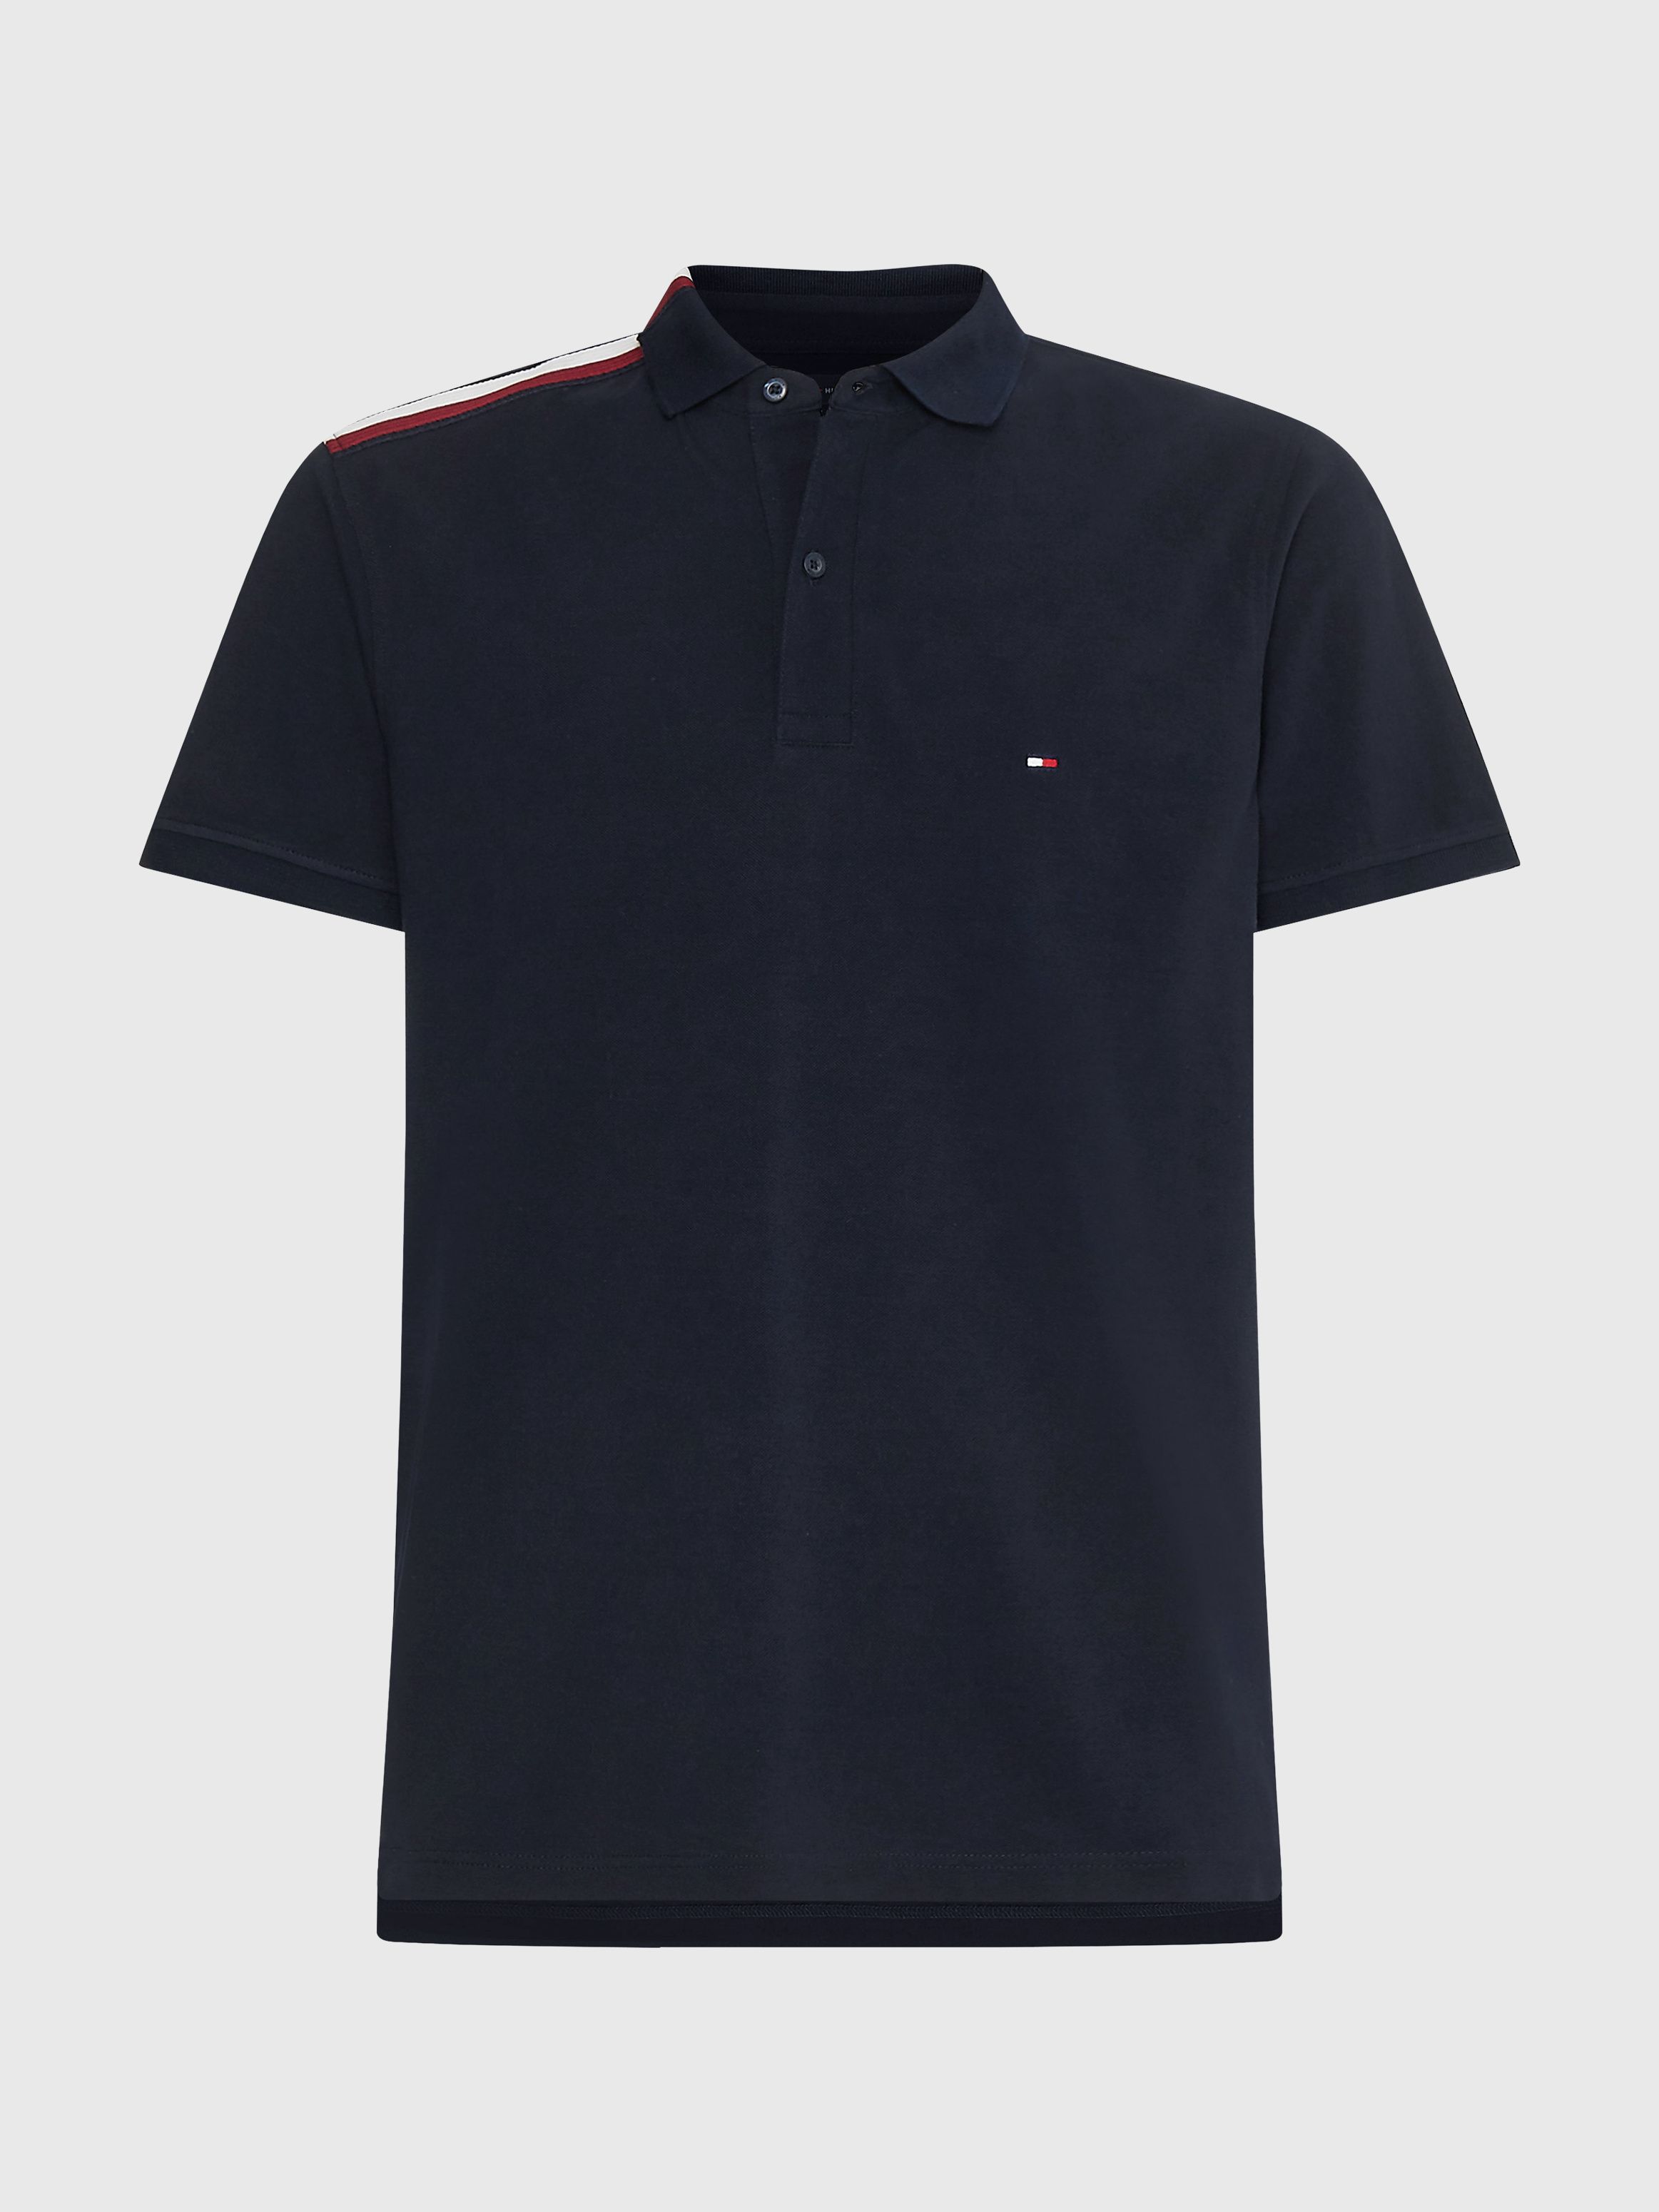 Signature Tape Regular Fit Polo | Tommy Hilfiger